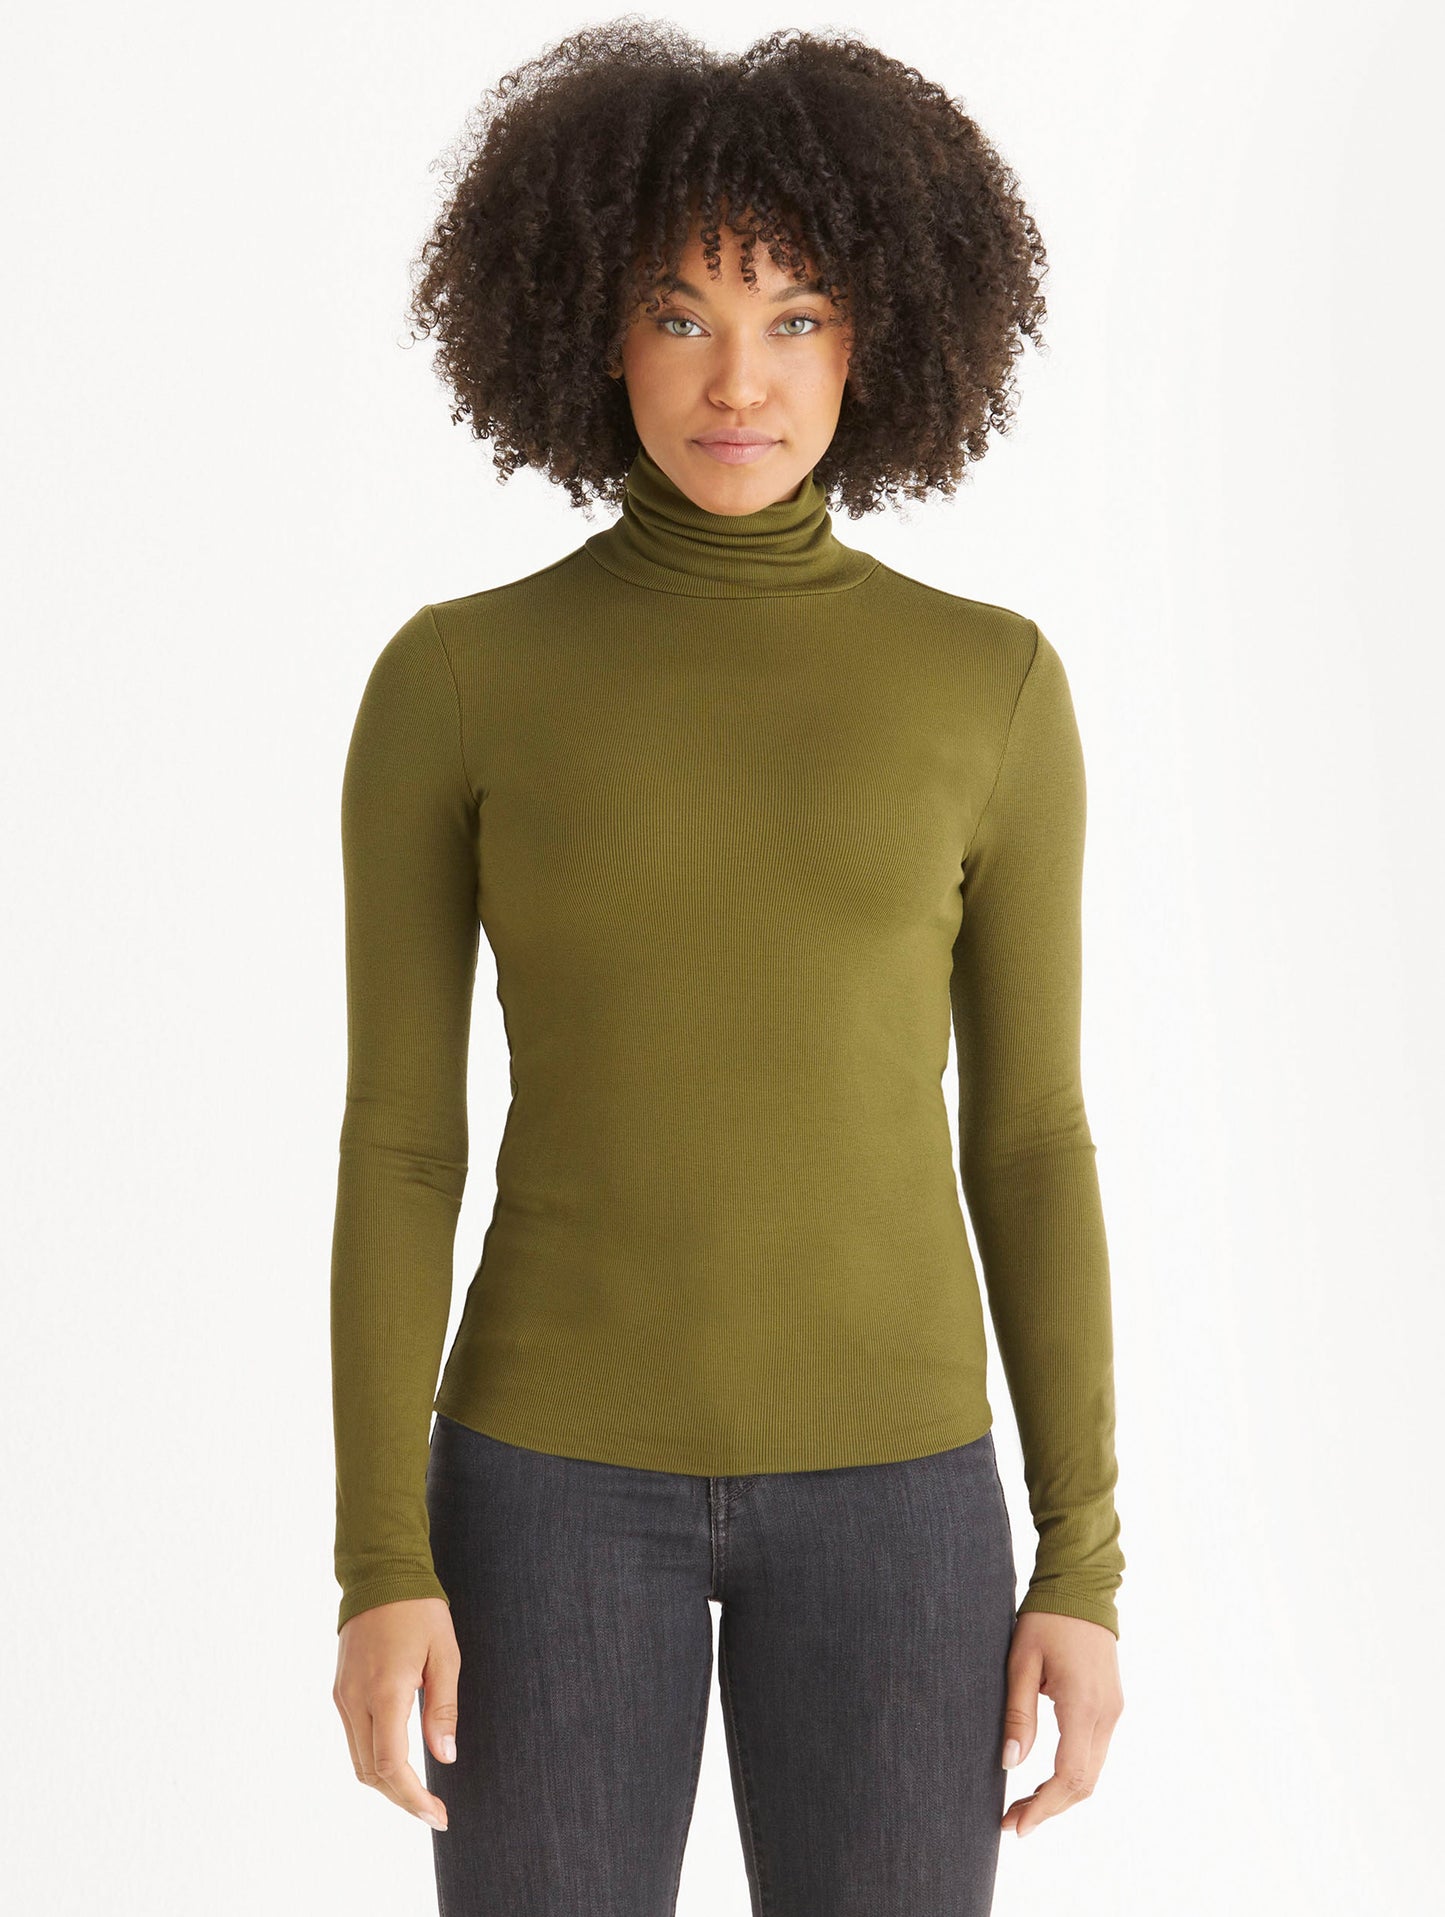 woman wearing green turtleneck shirt from Aether Apparel